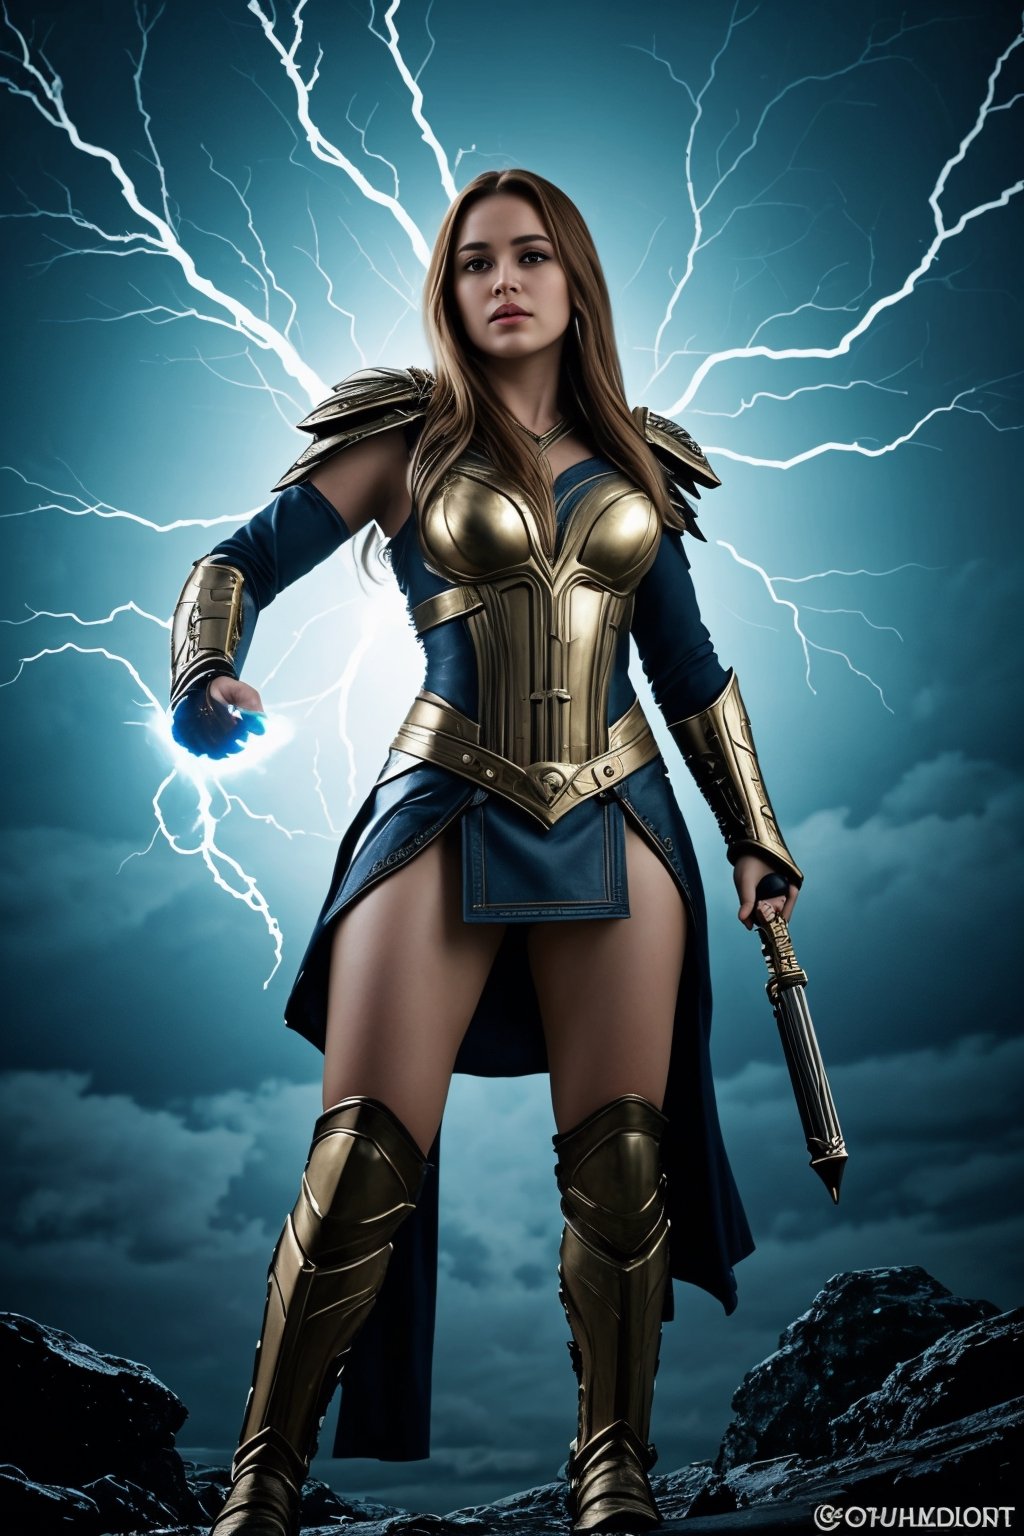 Background: Majestic Asgardian realm with golden spires and celestial skies.
Pose: Close-up shot, solo, 1 girl.
Character: Asgardian goddess of thunder, wielder of Mjolnir.
Outfit: Armor imbued with Asgardian runes and lightning motifs, adorned with a winged helm and wielding the mighty hammer, Mjolnir.
Expression: Commanding and determined, radiating power and authority as she channels the fury of the storm.